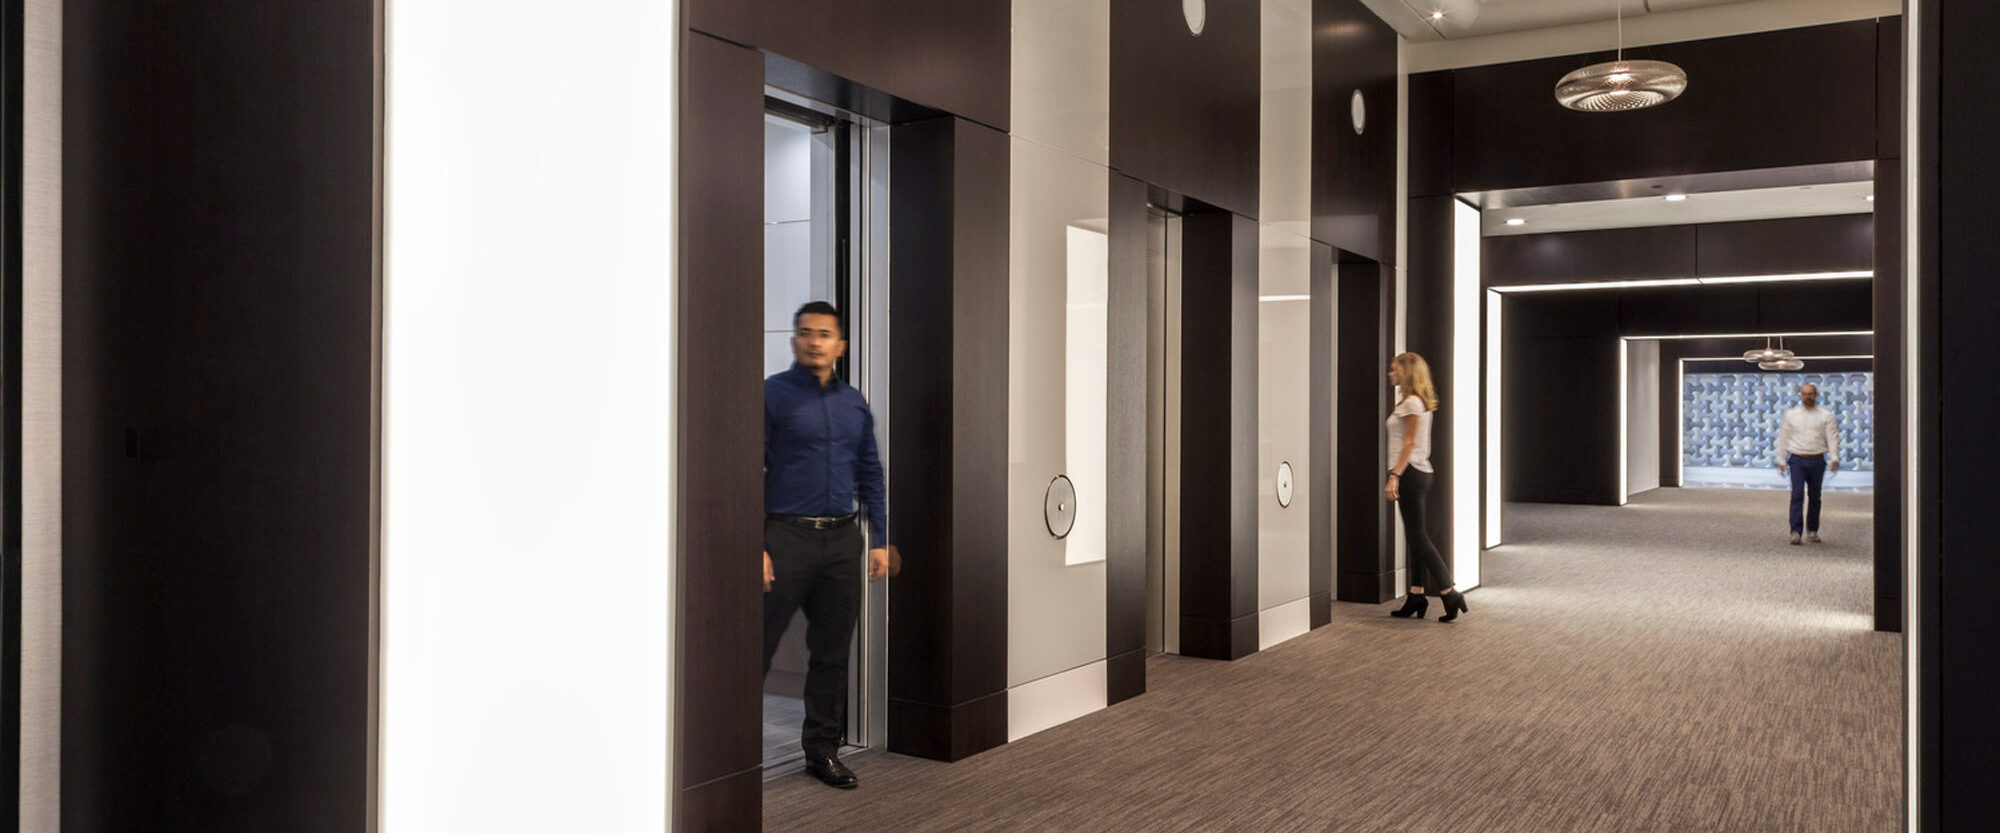 Elegant modern hallway featuring high-contrast design with dark wood panels and recessed white lighting. Geometric carpeting adds depth, while a traditional chandelier provides a classic touch against the clean lines. People casually walk, suggesting a dynamic corporate or hospitality space.